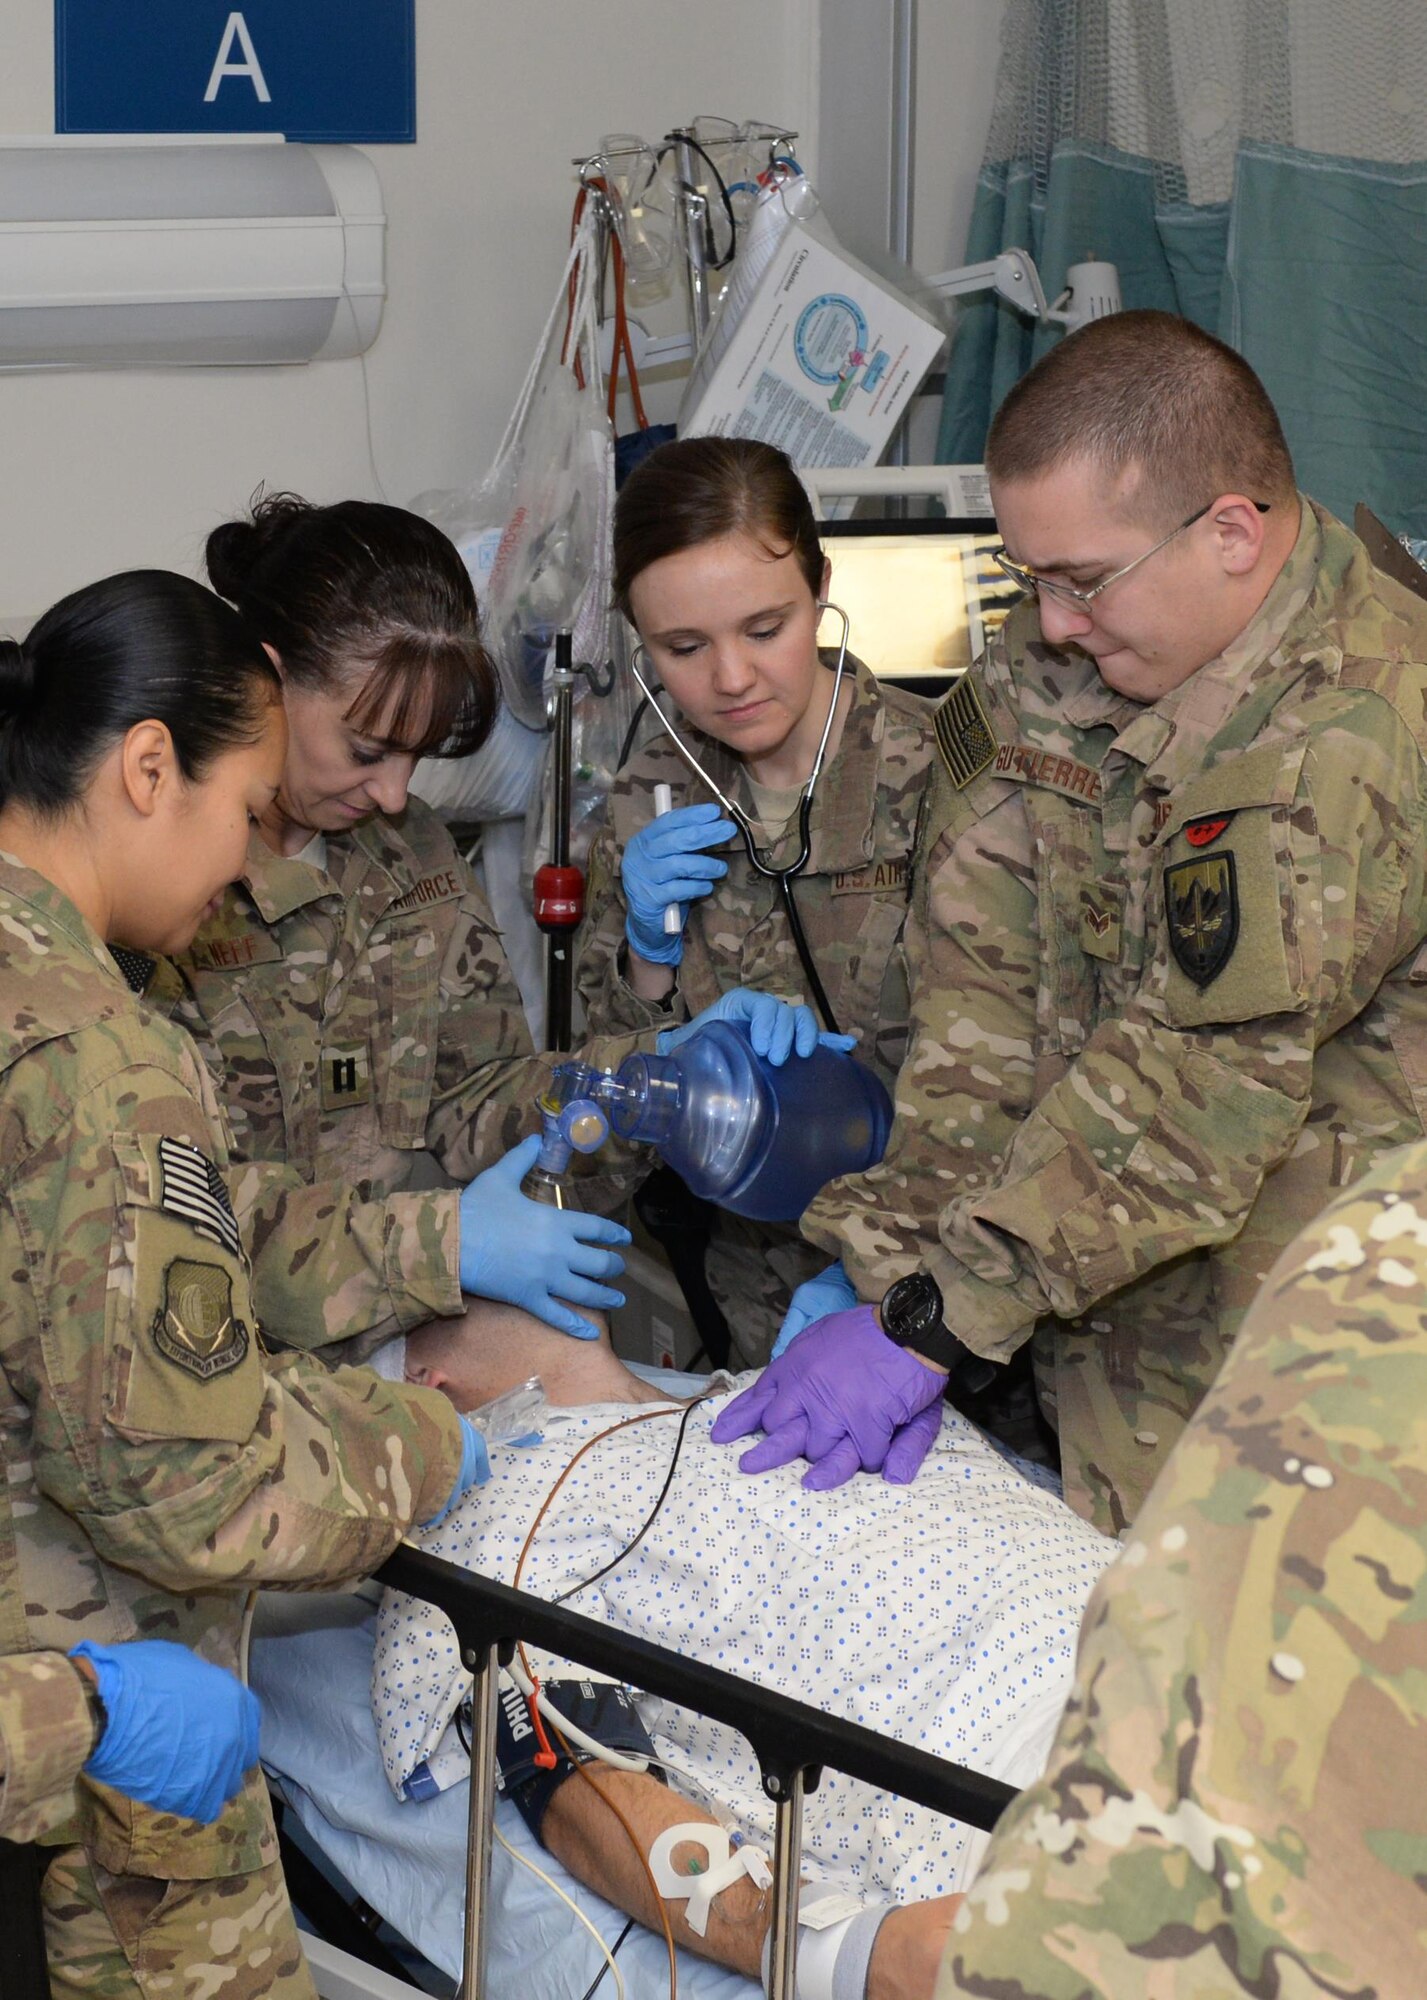 U.S. Air Force Capt. Mavis Bean and her team perform an exercise on a volunteer training patient at the Craig Joint Theatre Hospital June. 11, 2015 at Bagram Airfield, Afghanistan. The team works in the intensive care unit at Afghanistan’s most advanced medical facility, the Craig Joint Theater Hospital, and is responsible for treating trauma patients. (U.S. Air Force photo by Senior Airmen Cierra Presentado/Released)